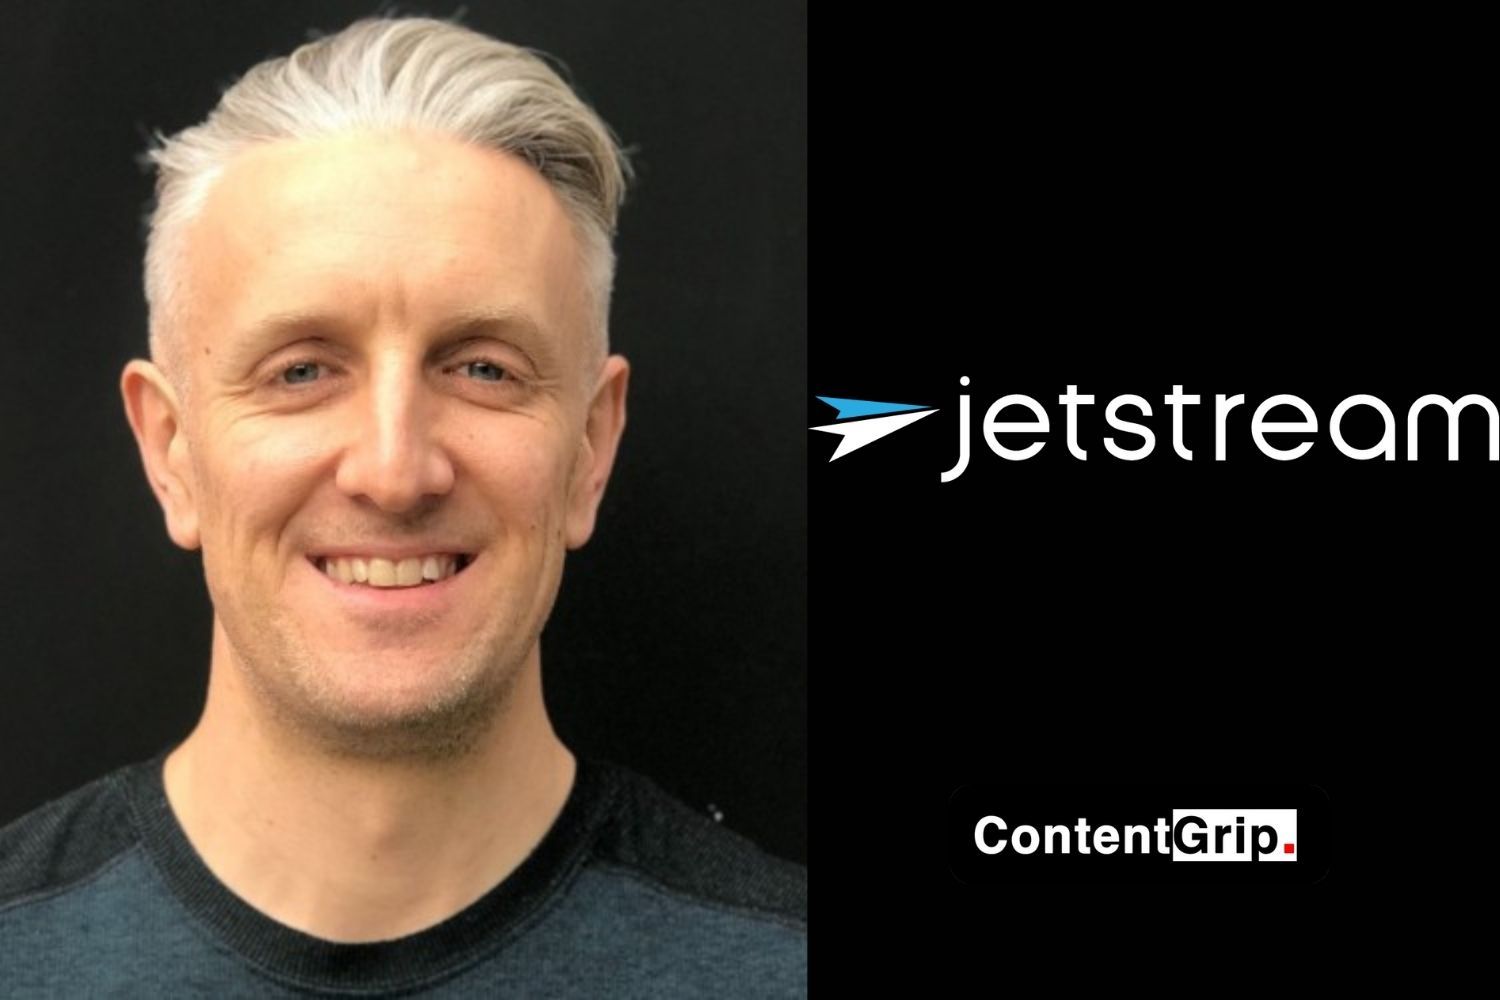 Jetstream CEO Mike Williams on why startups should start marketing from day one